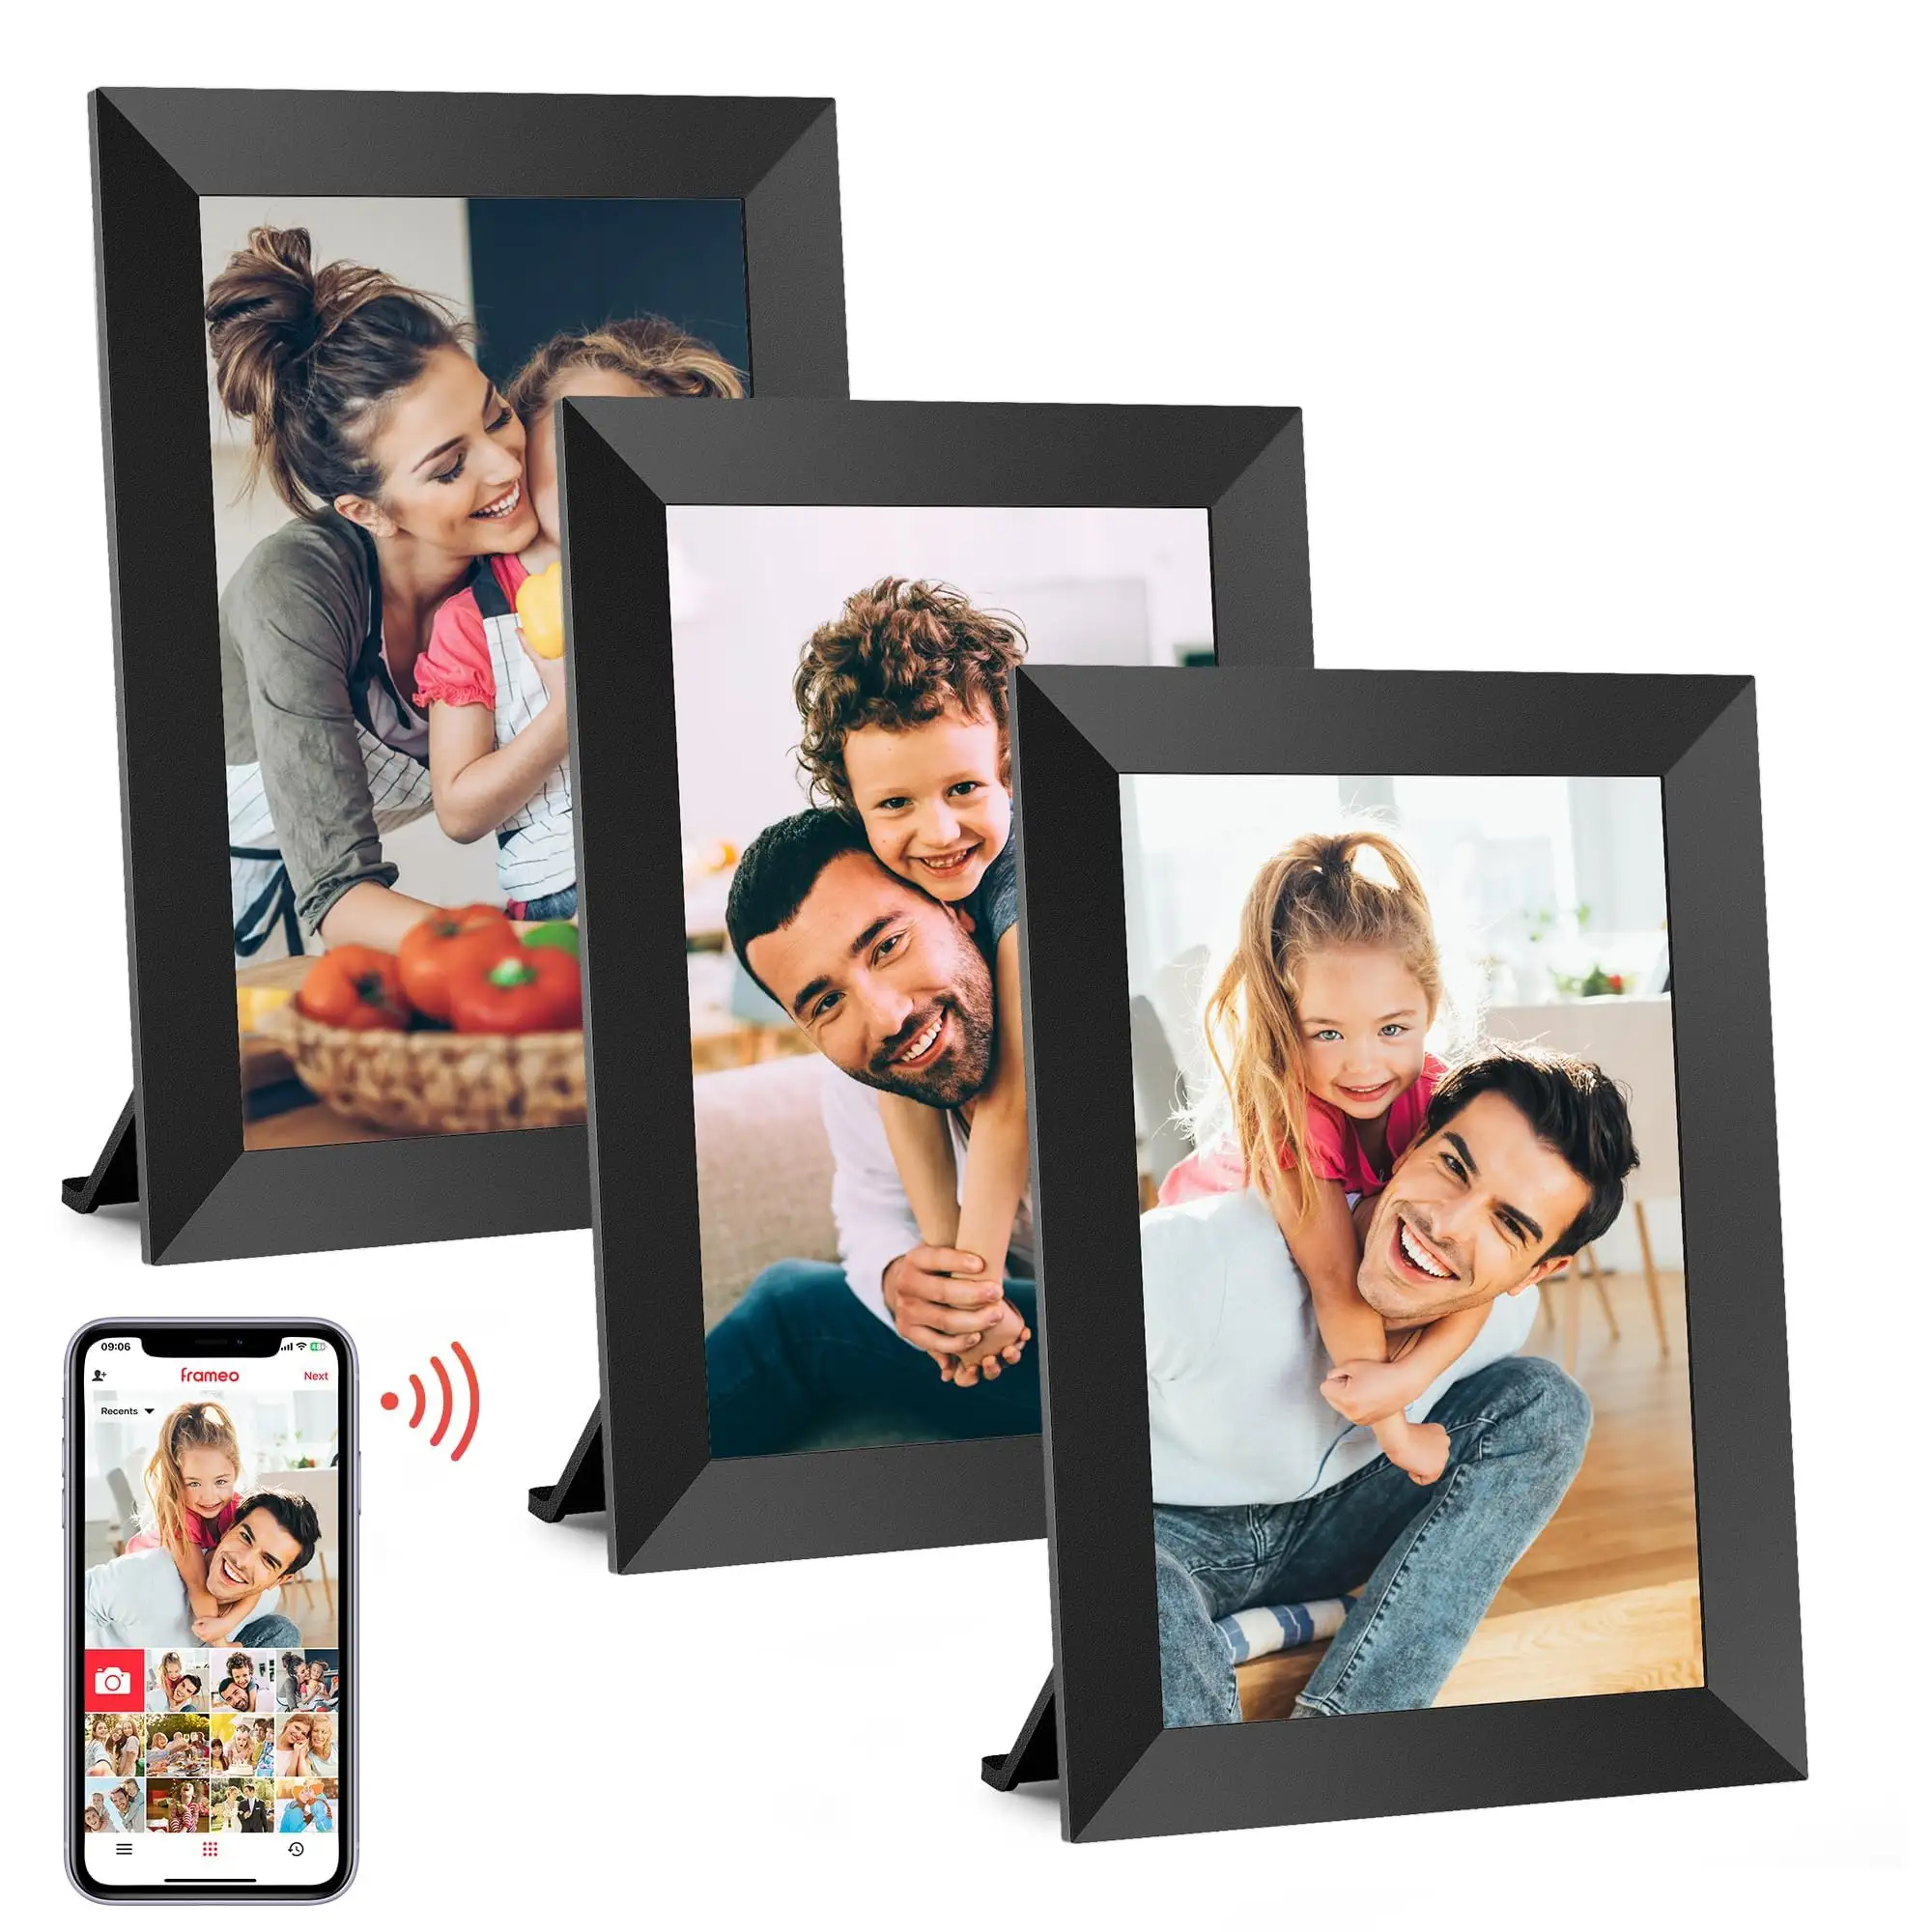 Download free mp3 mp4 calendar led a3 a4 plastic video playback 7 8 9 10 inch digital photo frame